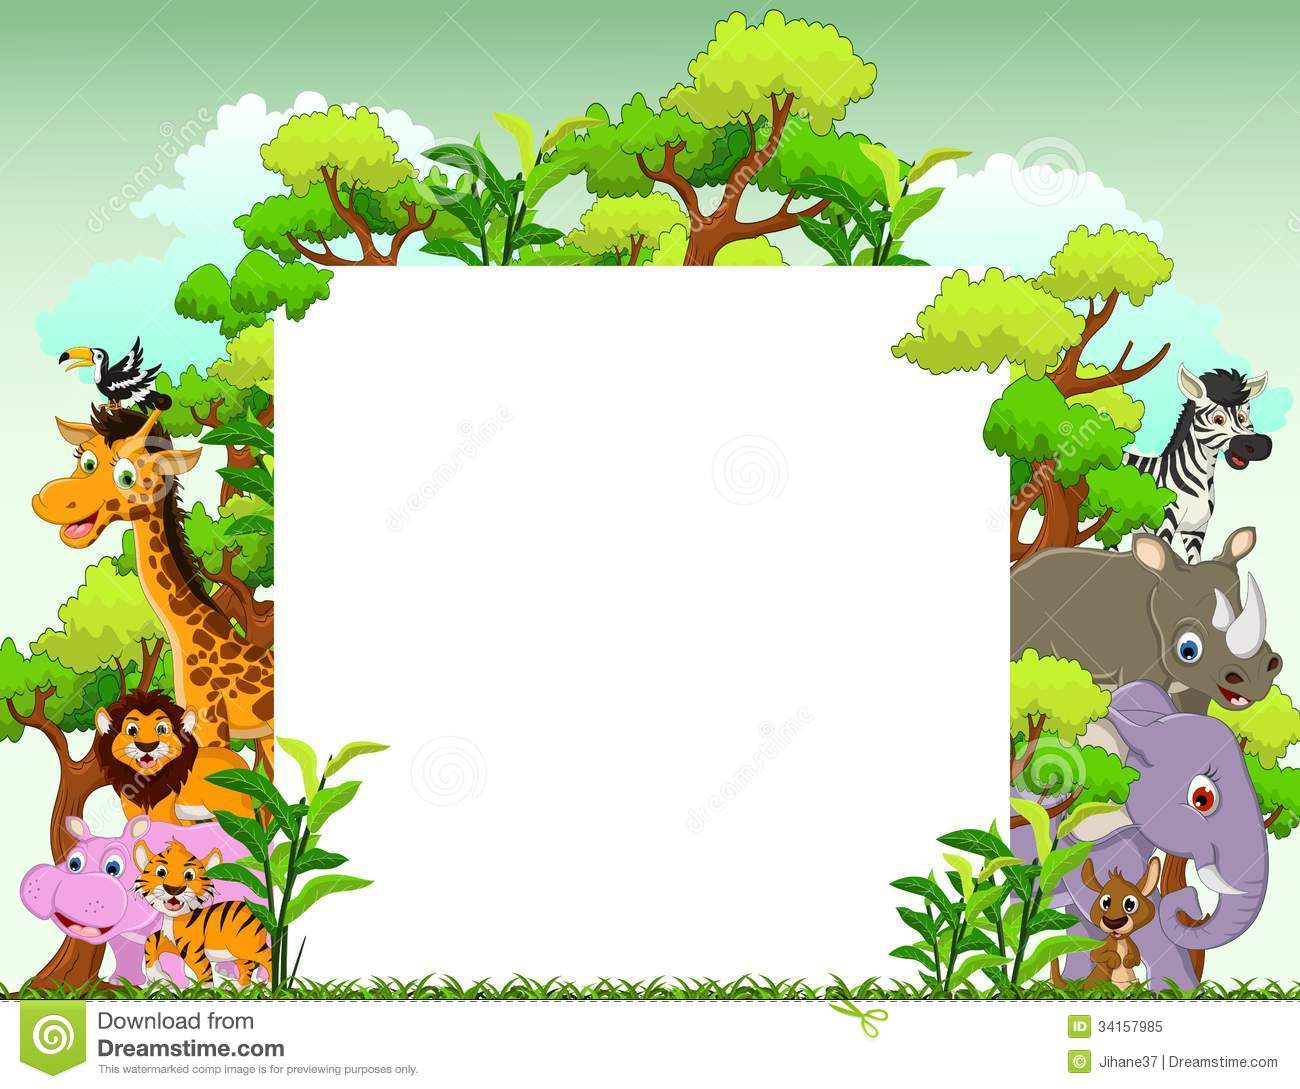 Jungle Animal Background Clipart.